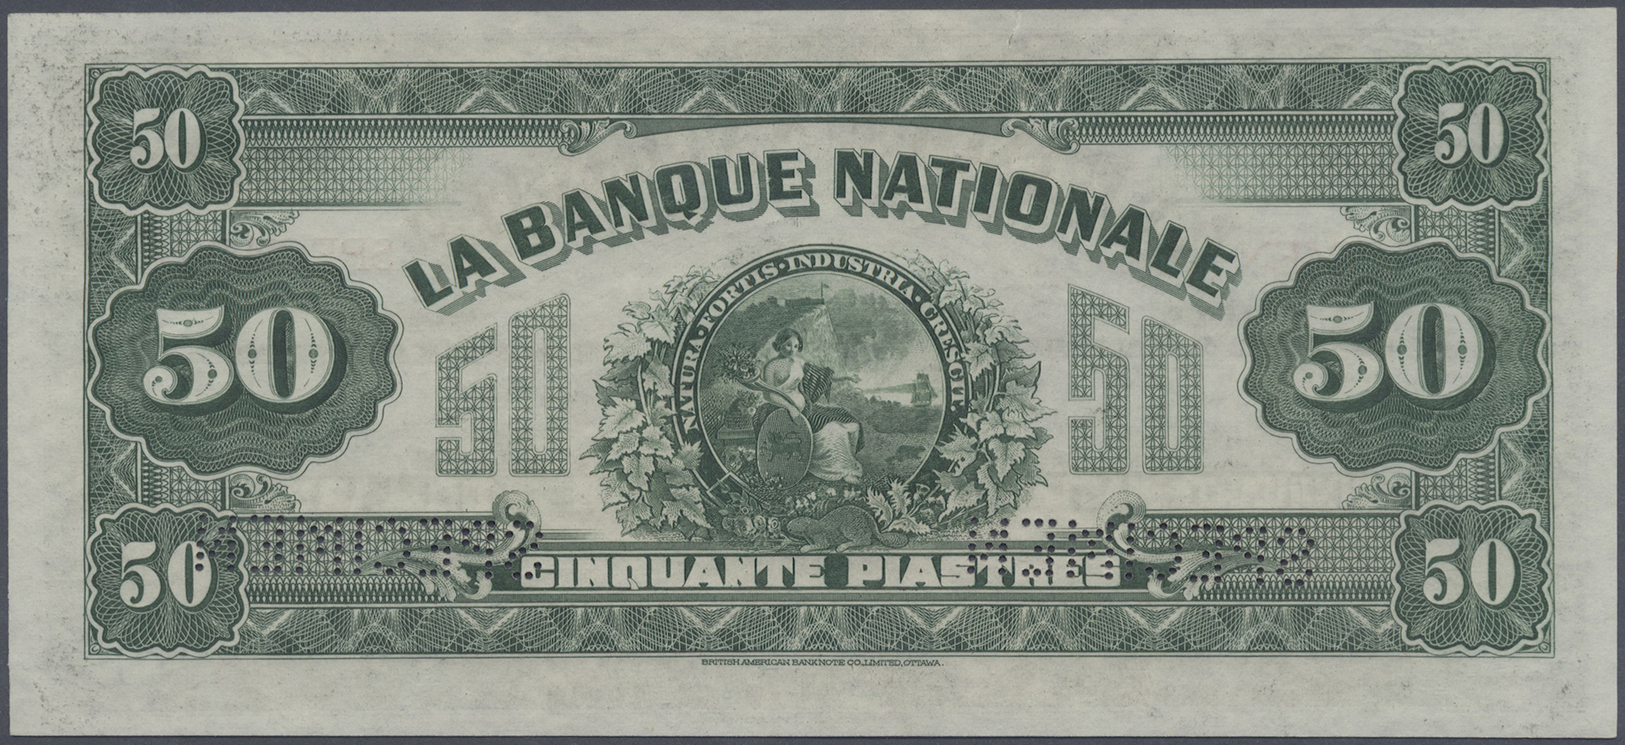 00486 Canada: 50 Dollars / 50 Piastres 1922 Specimen P. S874s Issued By "La Banque Nationale" With Two "Specimen" Perfor - Canada